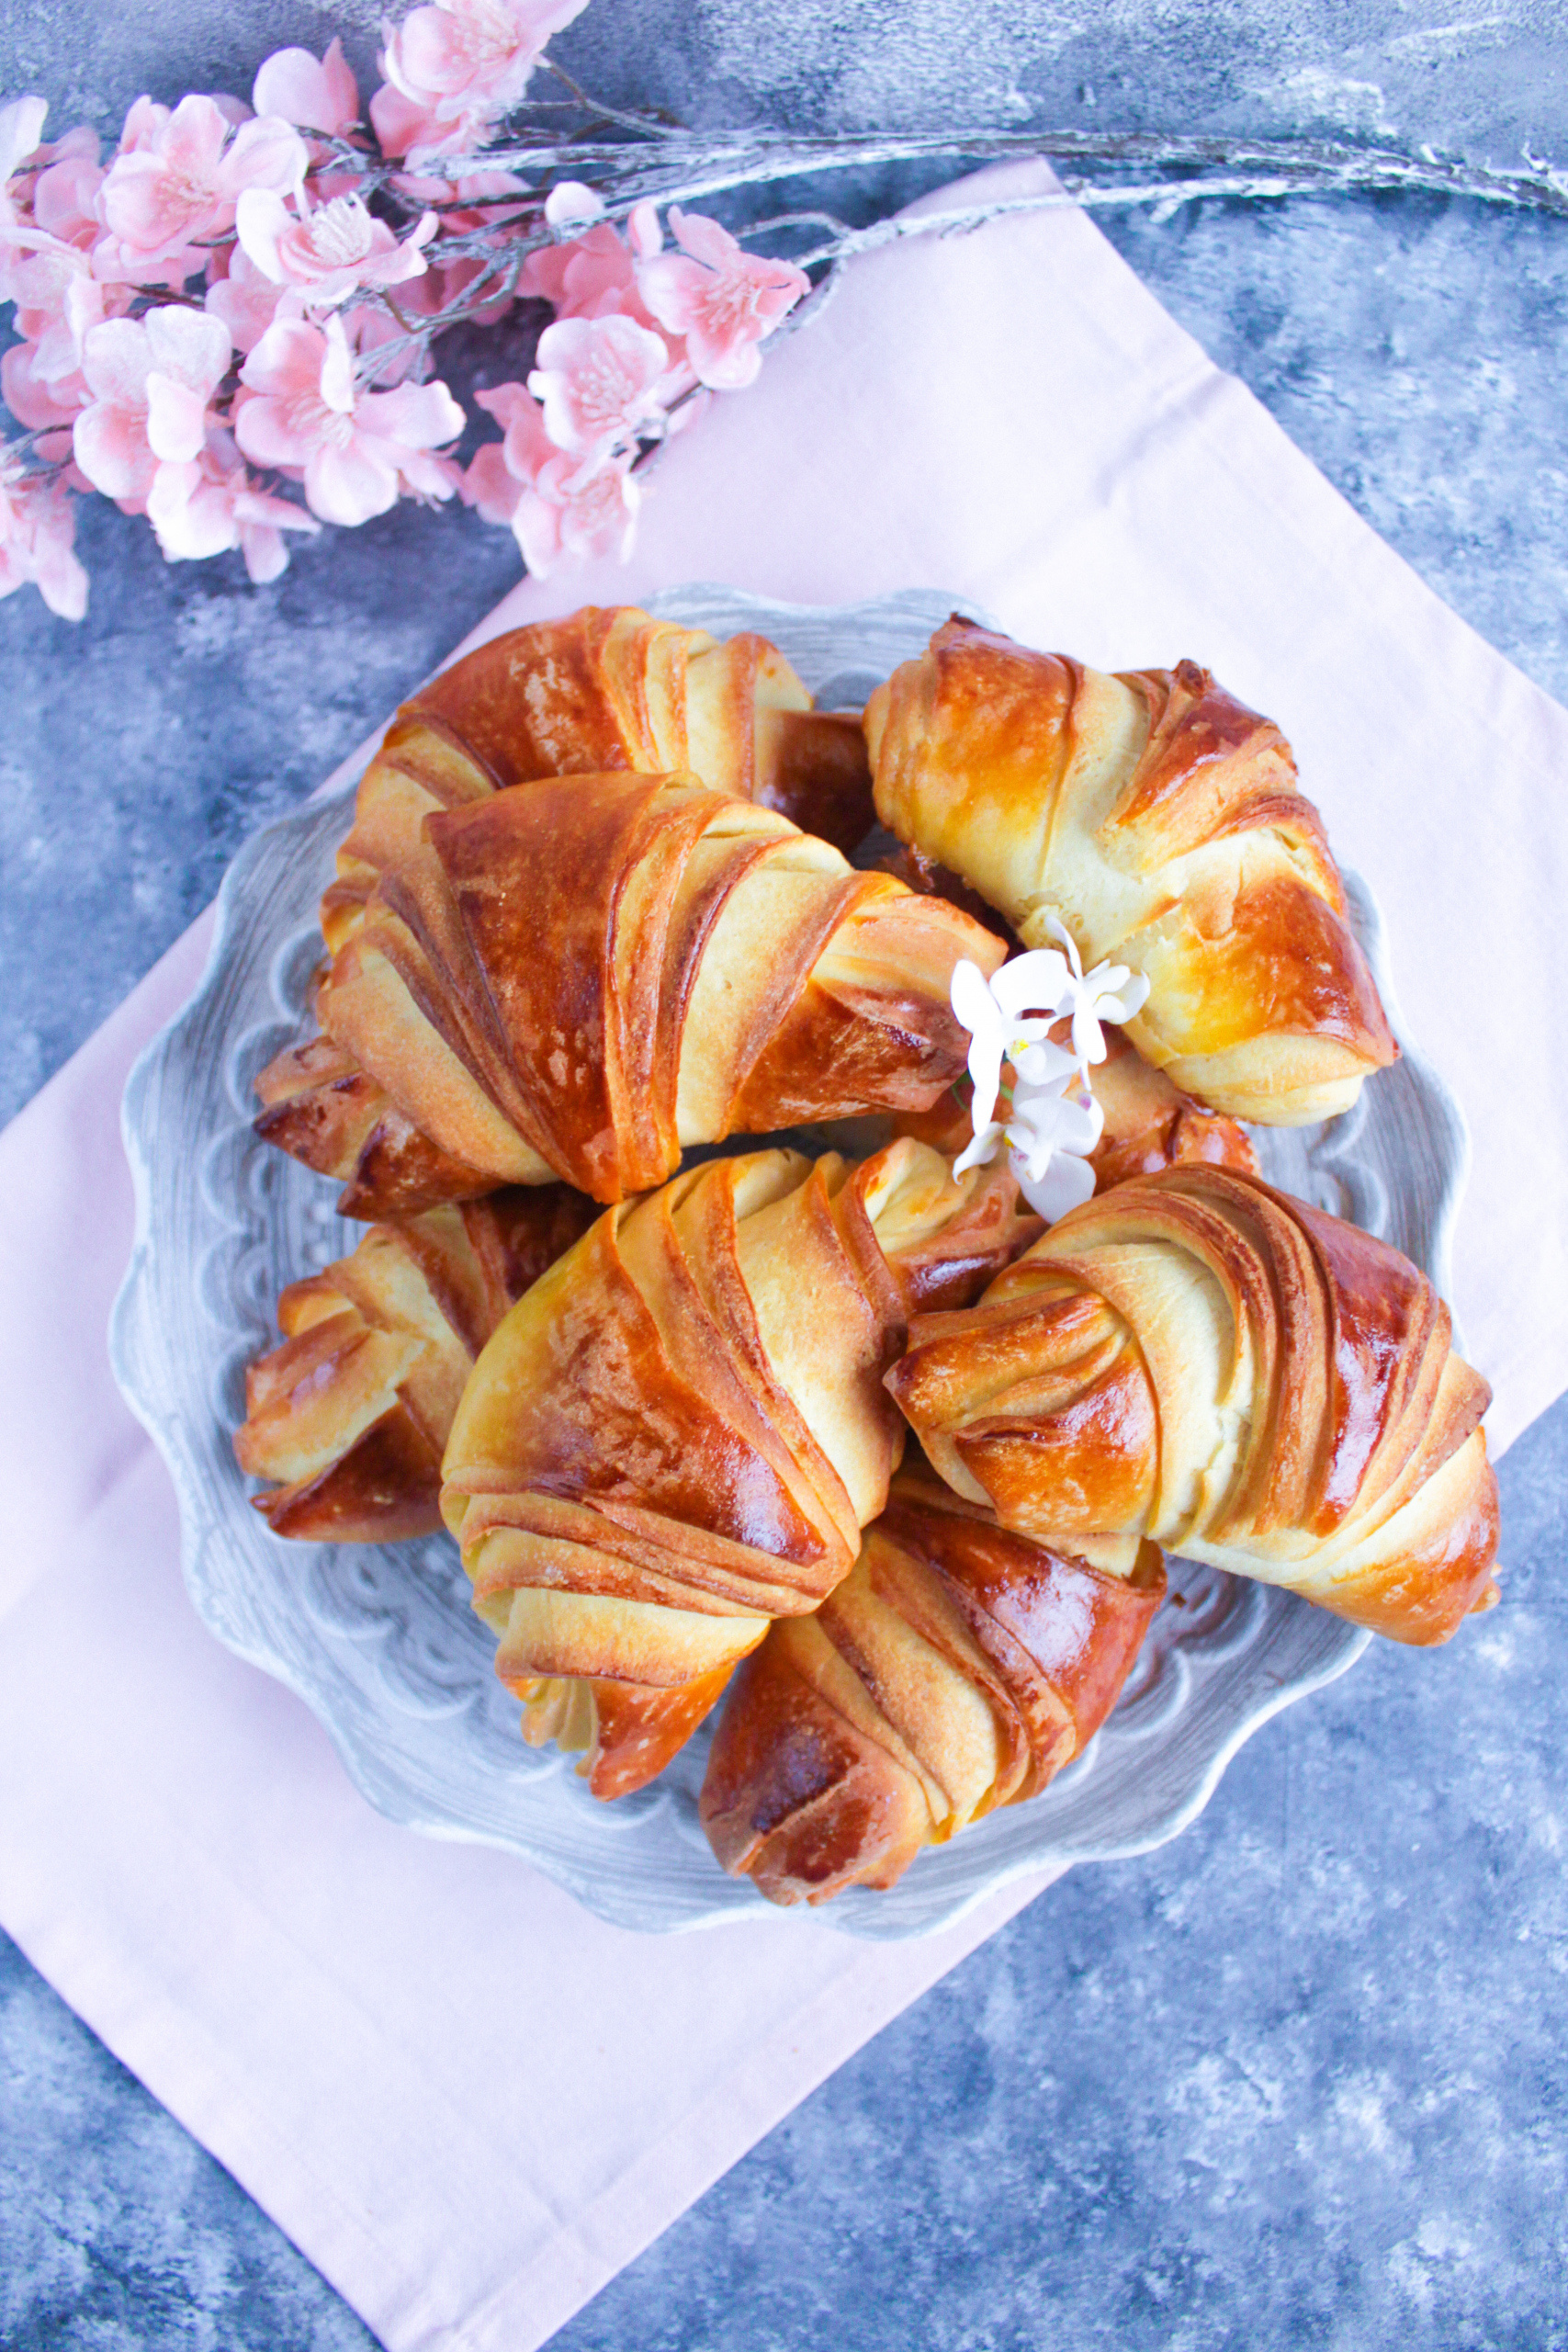 Croissant: The classic sweet-filled pastry use almonds, marzipan, or chocolate. 1710x2560 HD Wallpaper.